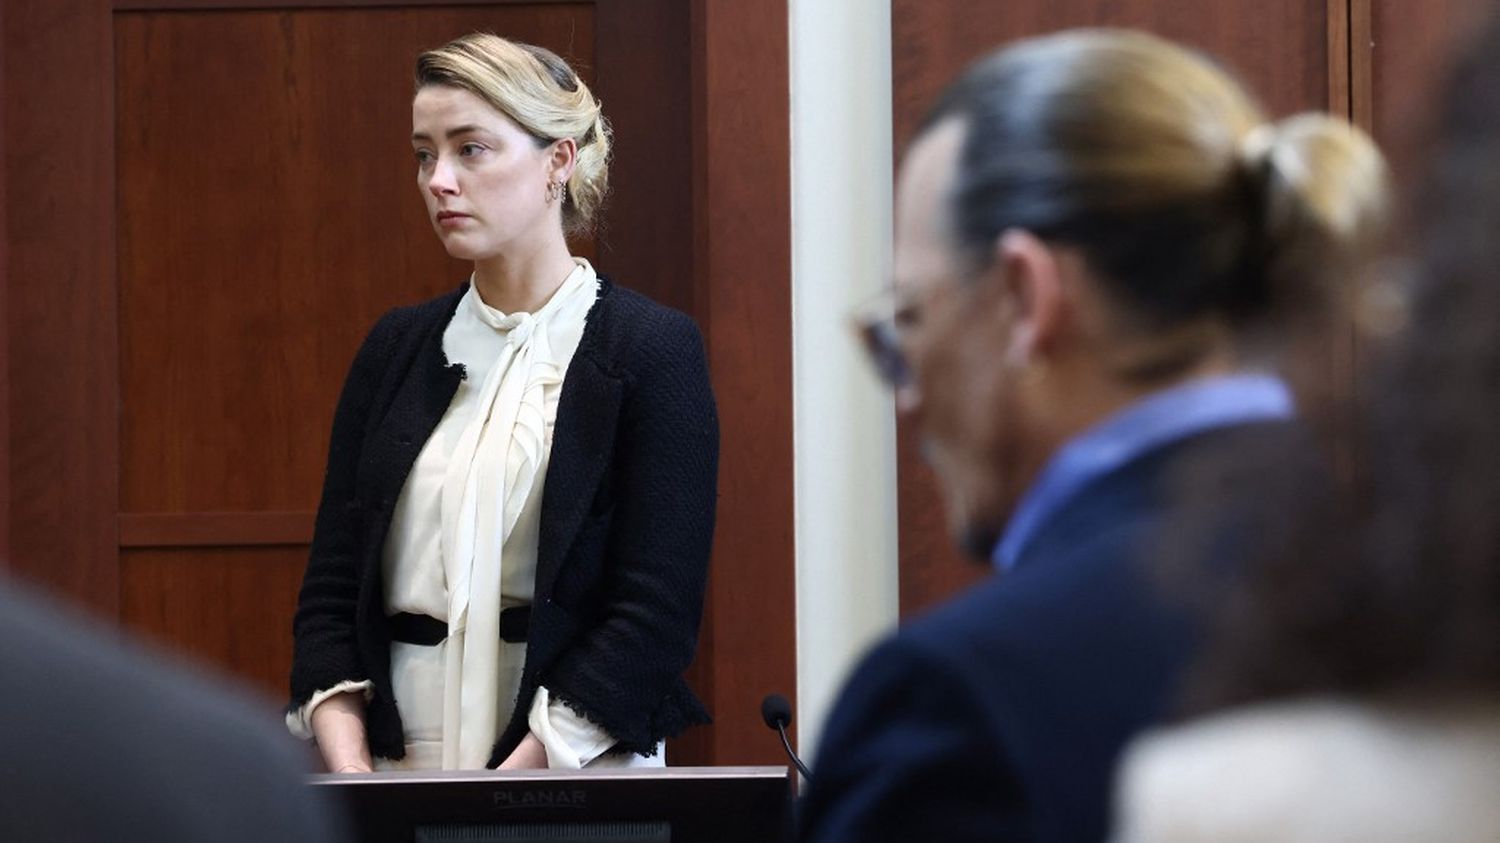 Johnny Depp-Amber Heard trial: actress describes three days of domestic violence in Australia
